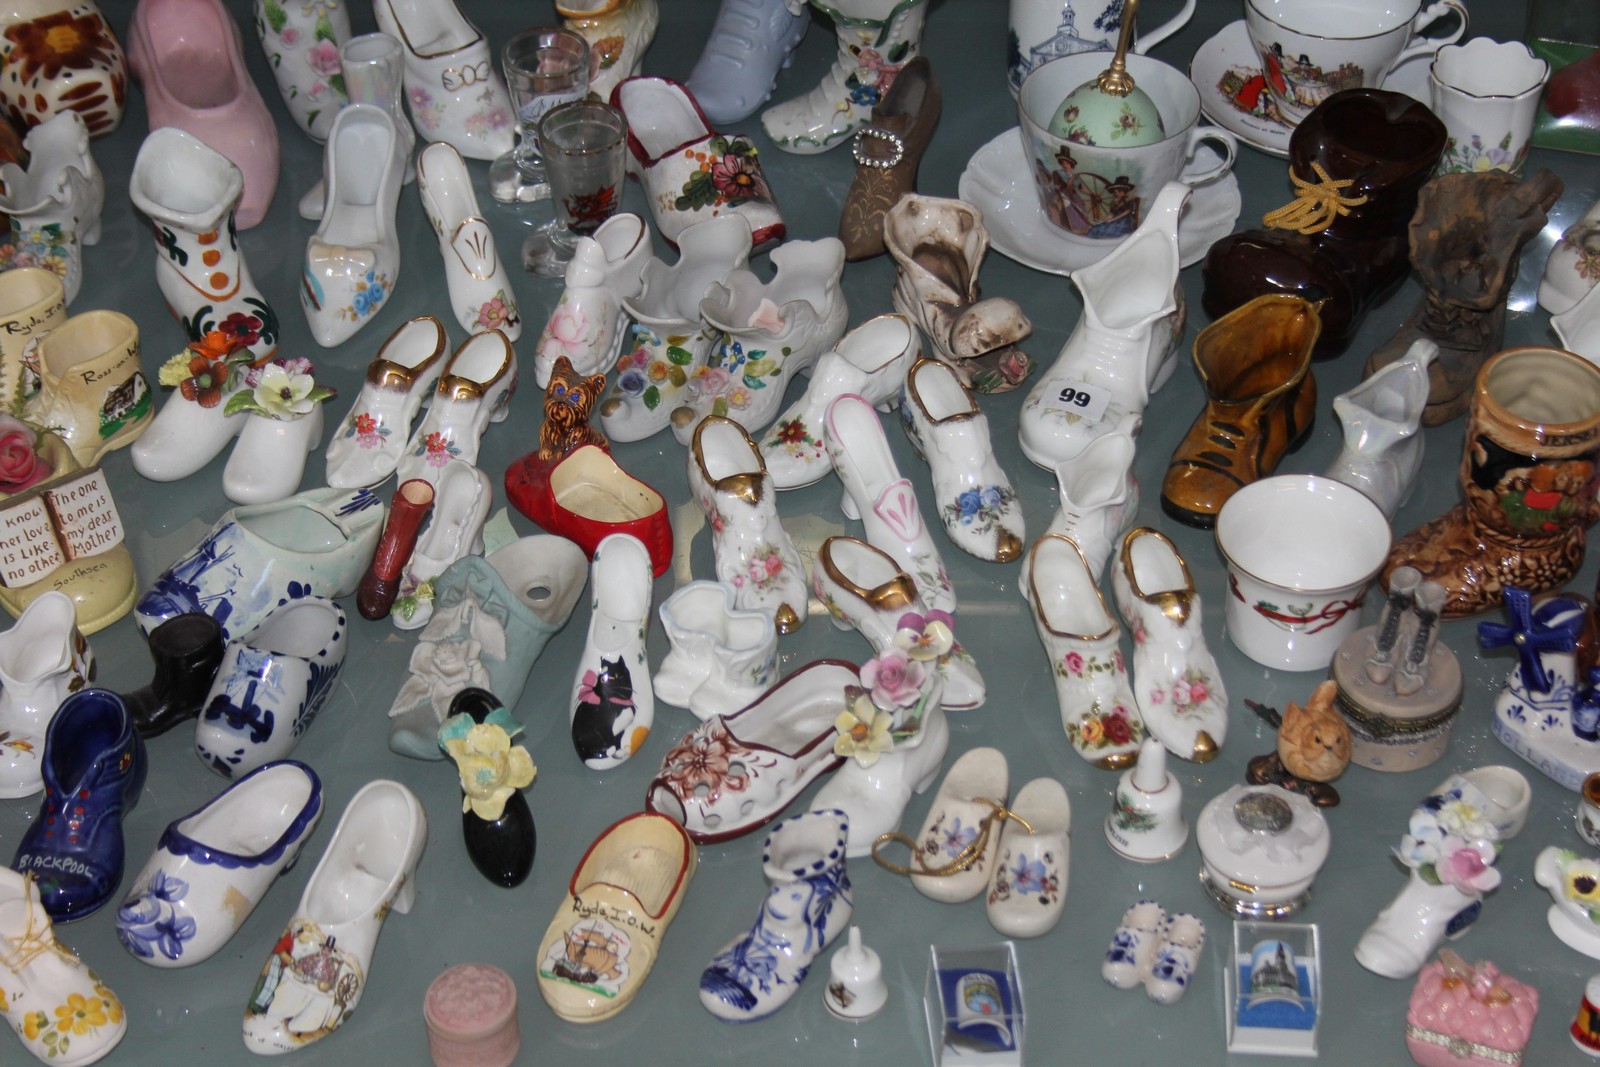 A quantity of assorted porcelain collectors slippers and boots, (qty)